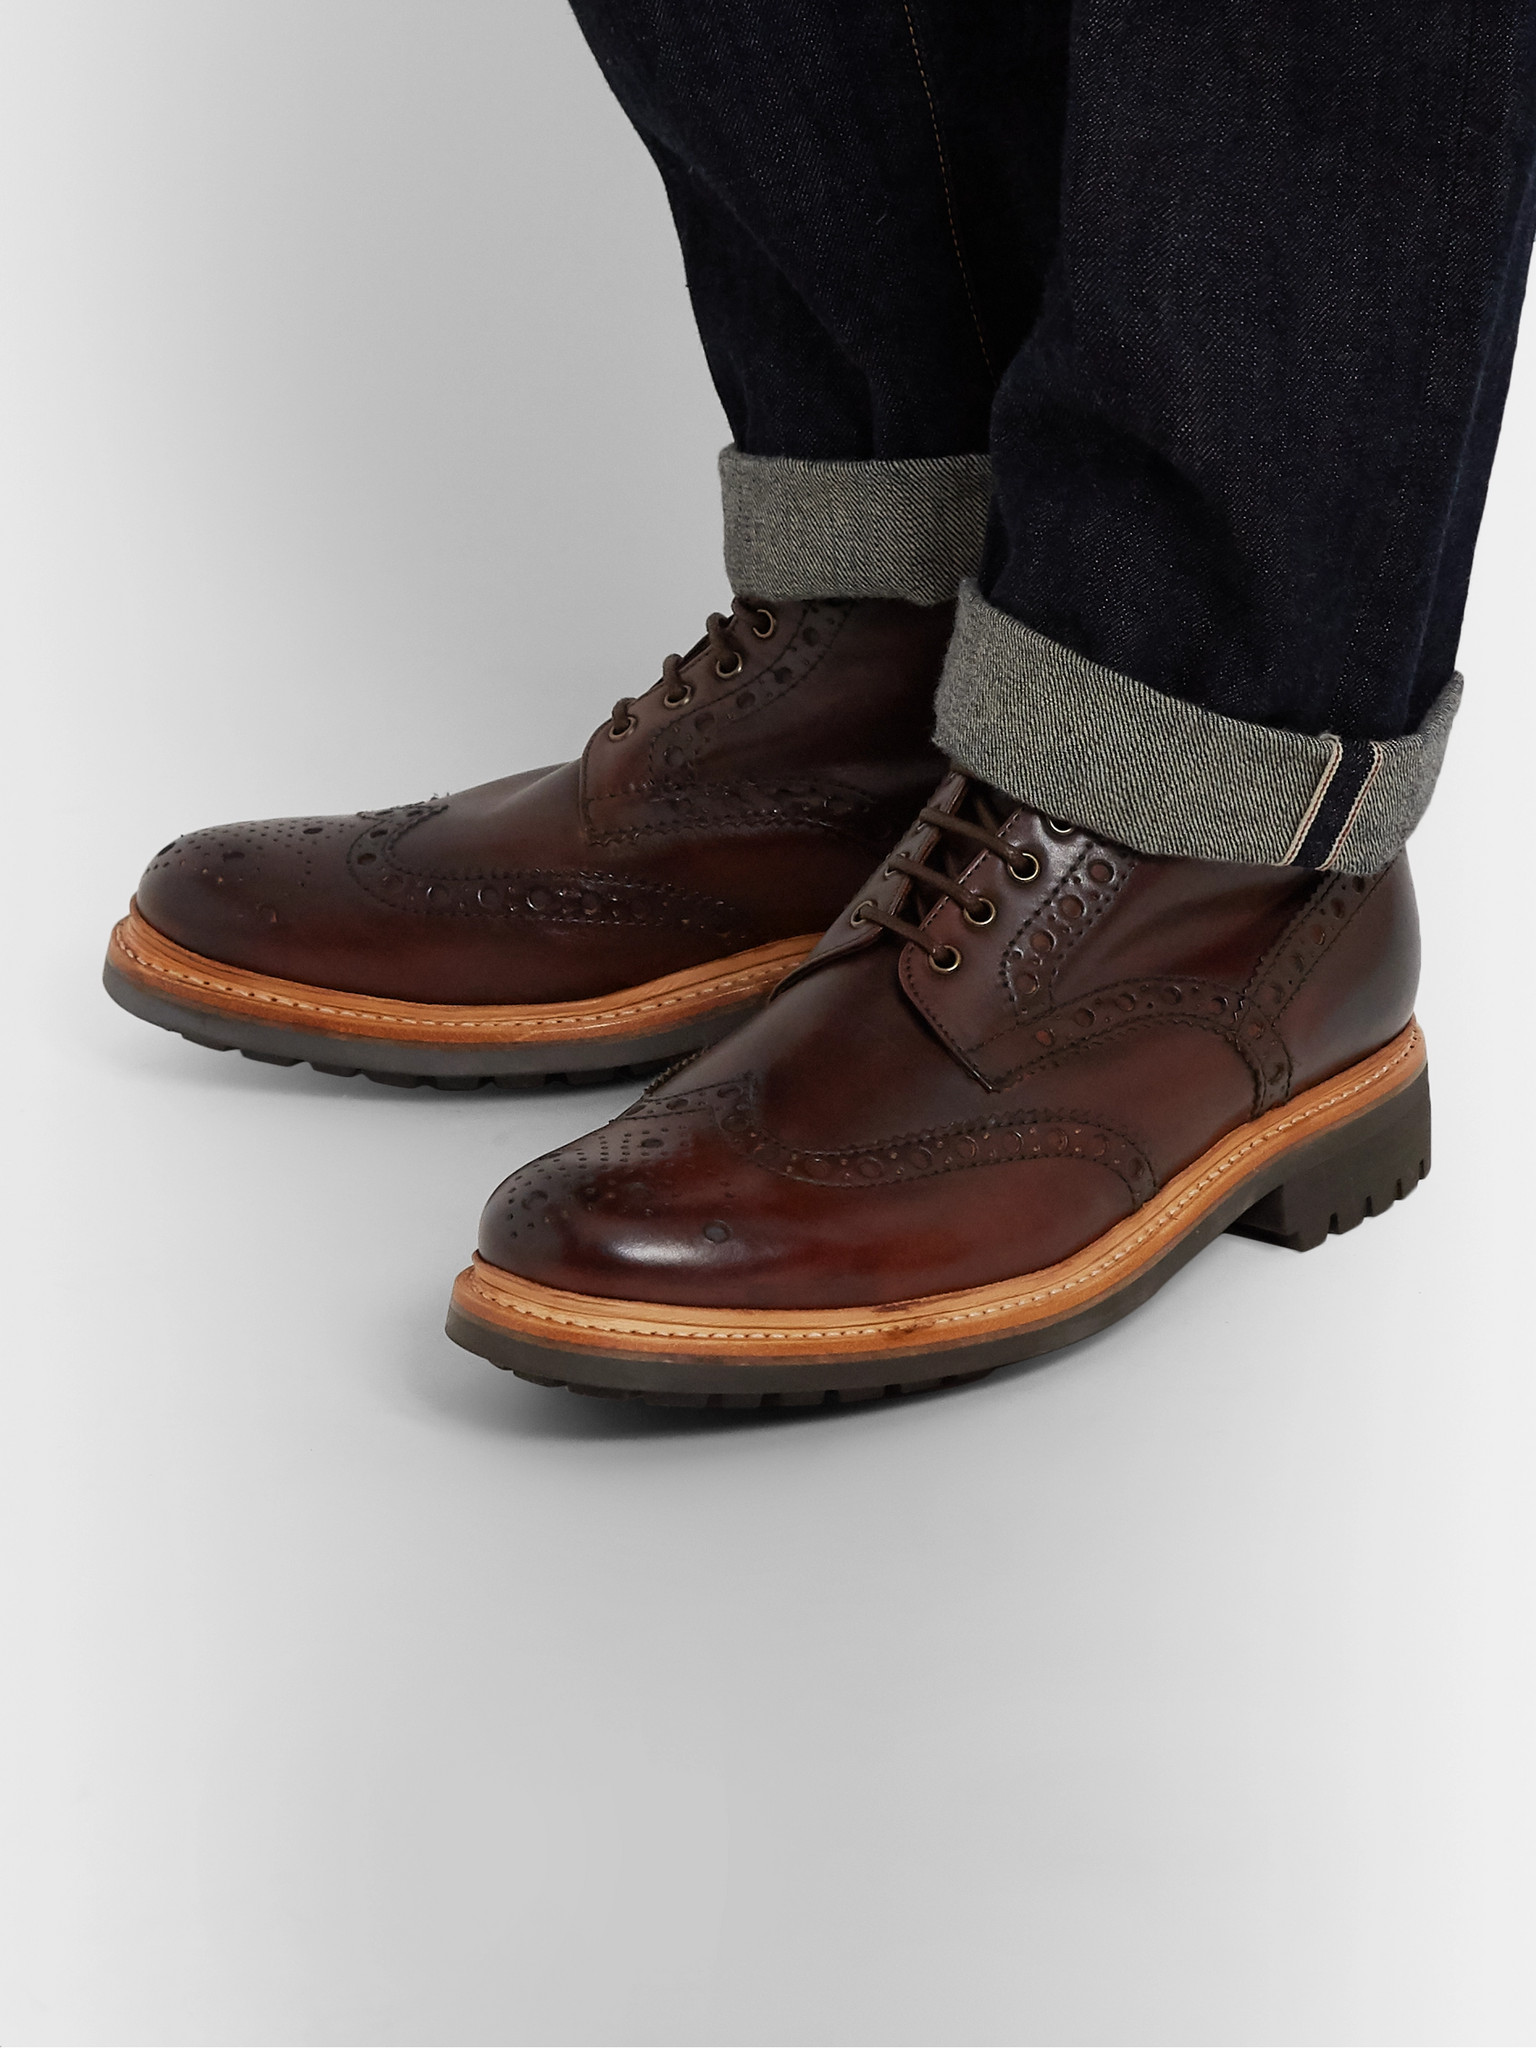 Grenson Fred Brogue Boots